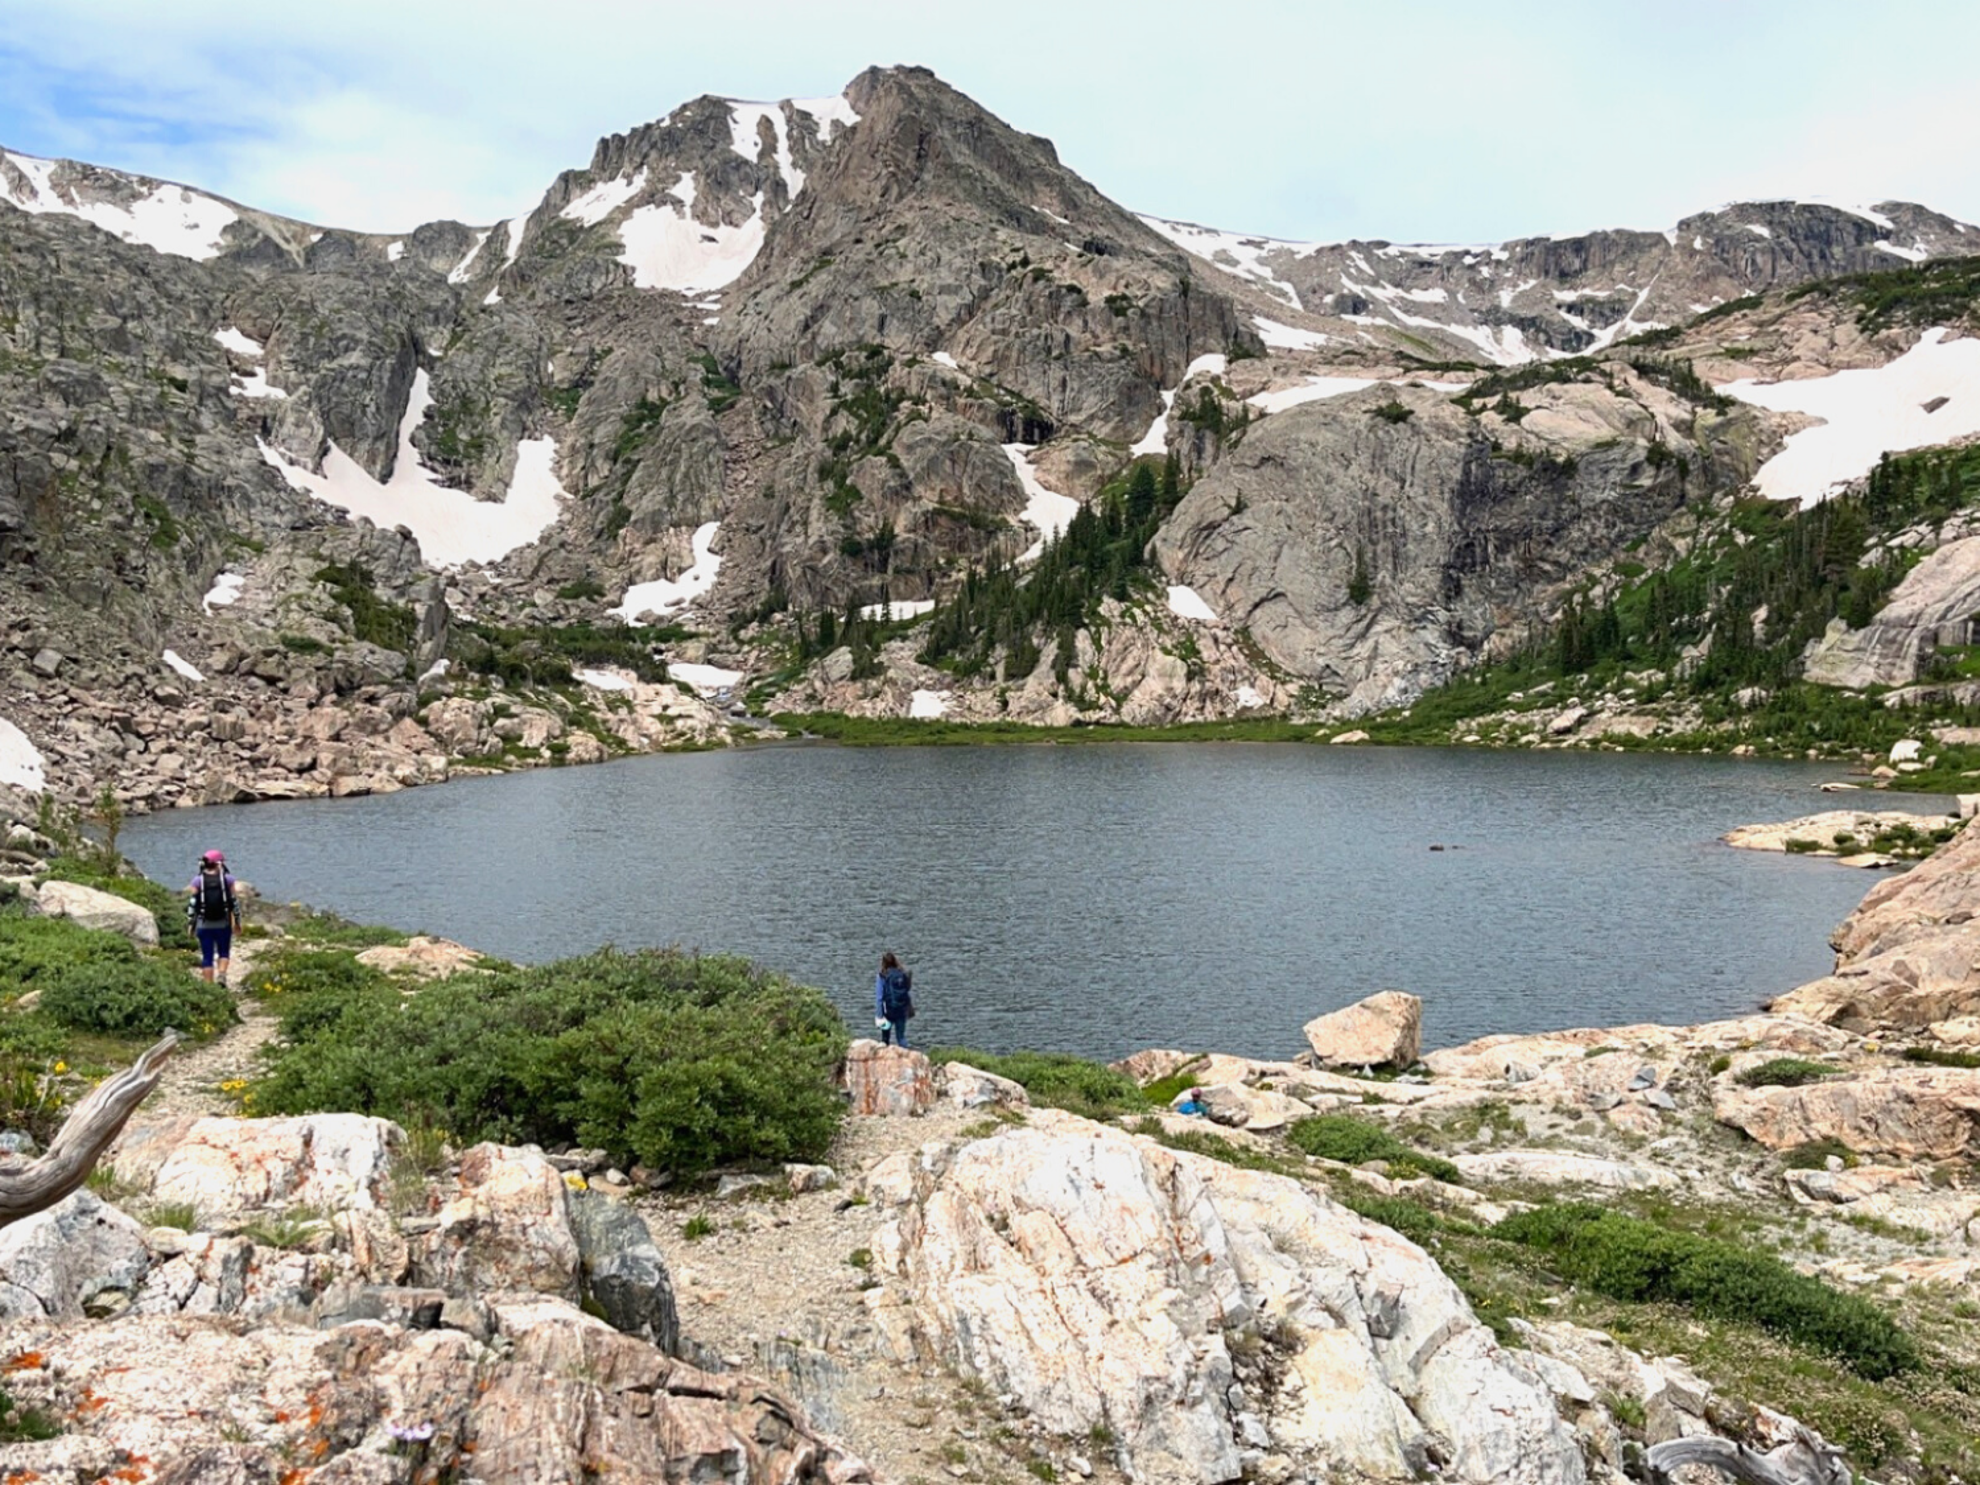 Picture of Peak Pursuits in Colorado's Rocky Mountain National Park